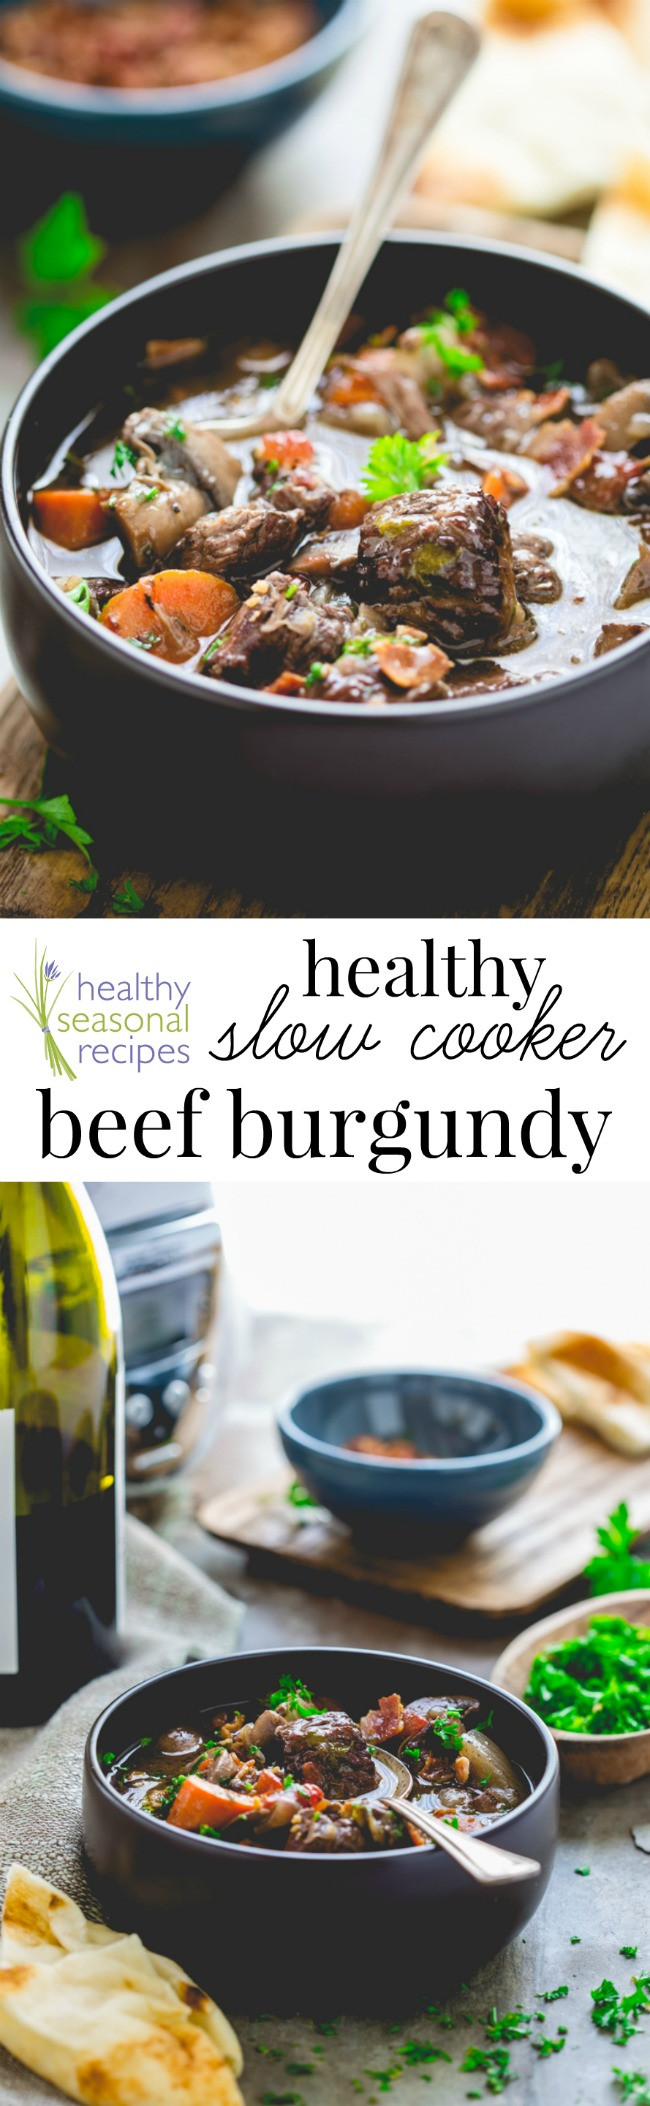 Healthy Slow Cooker Recipes Beef
 healthy slow cooker beef burgundy Healthy Seasonal Recipes